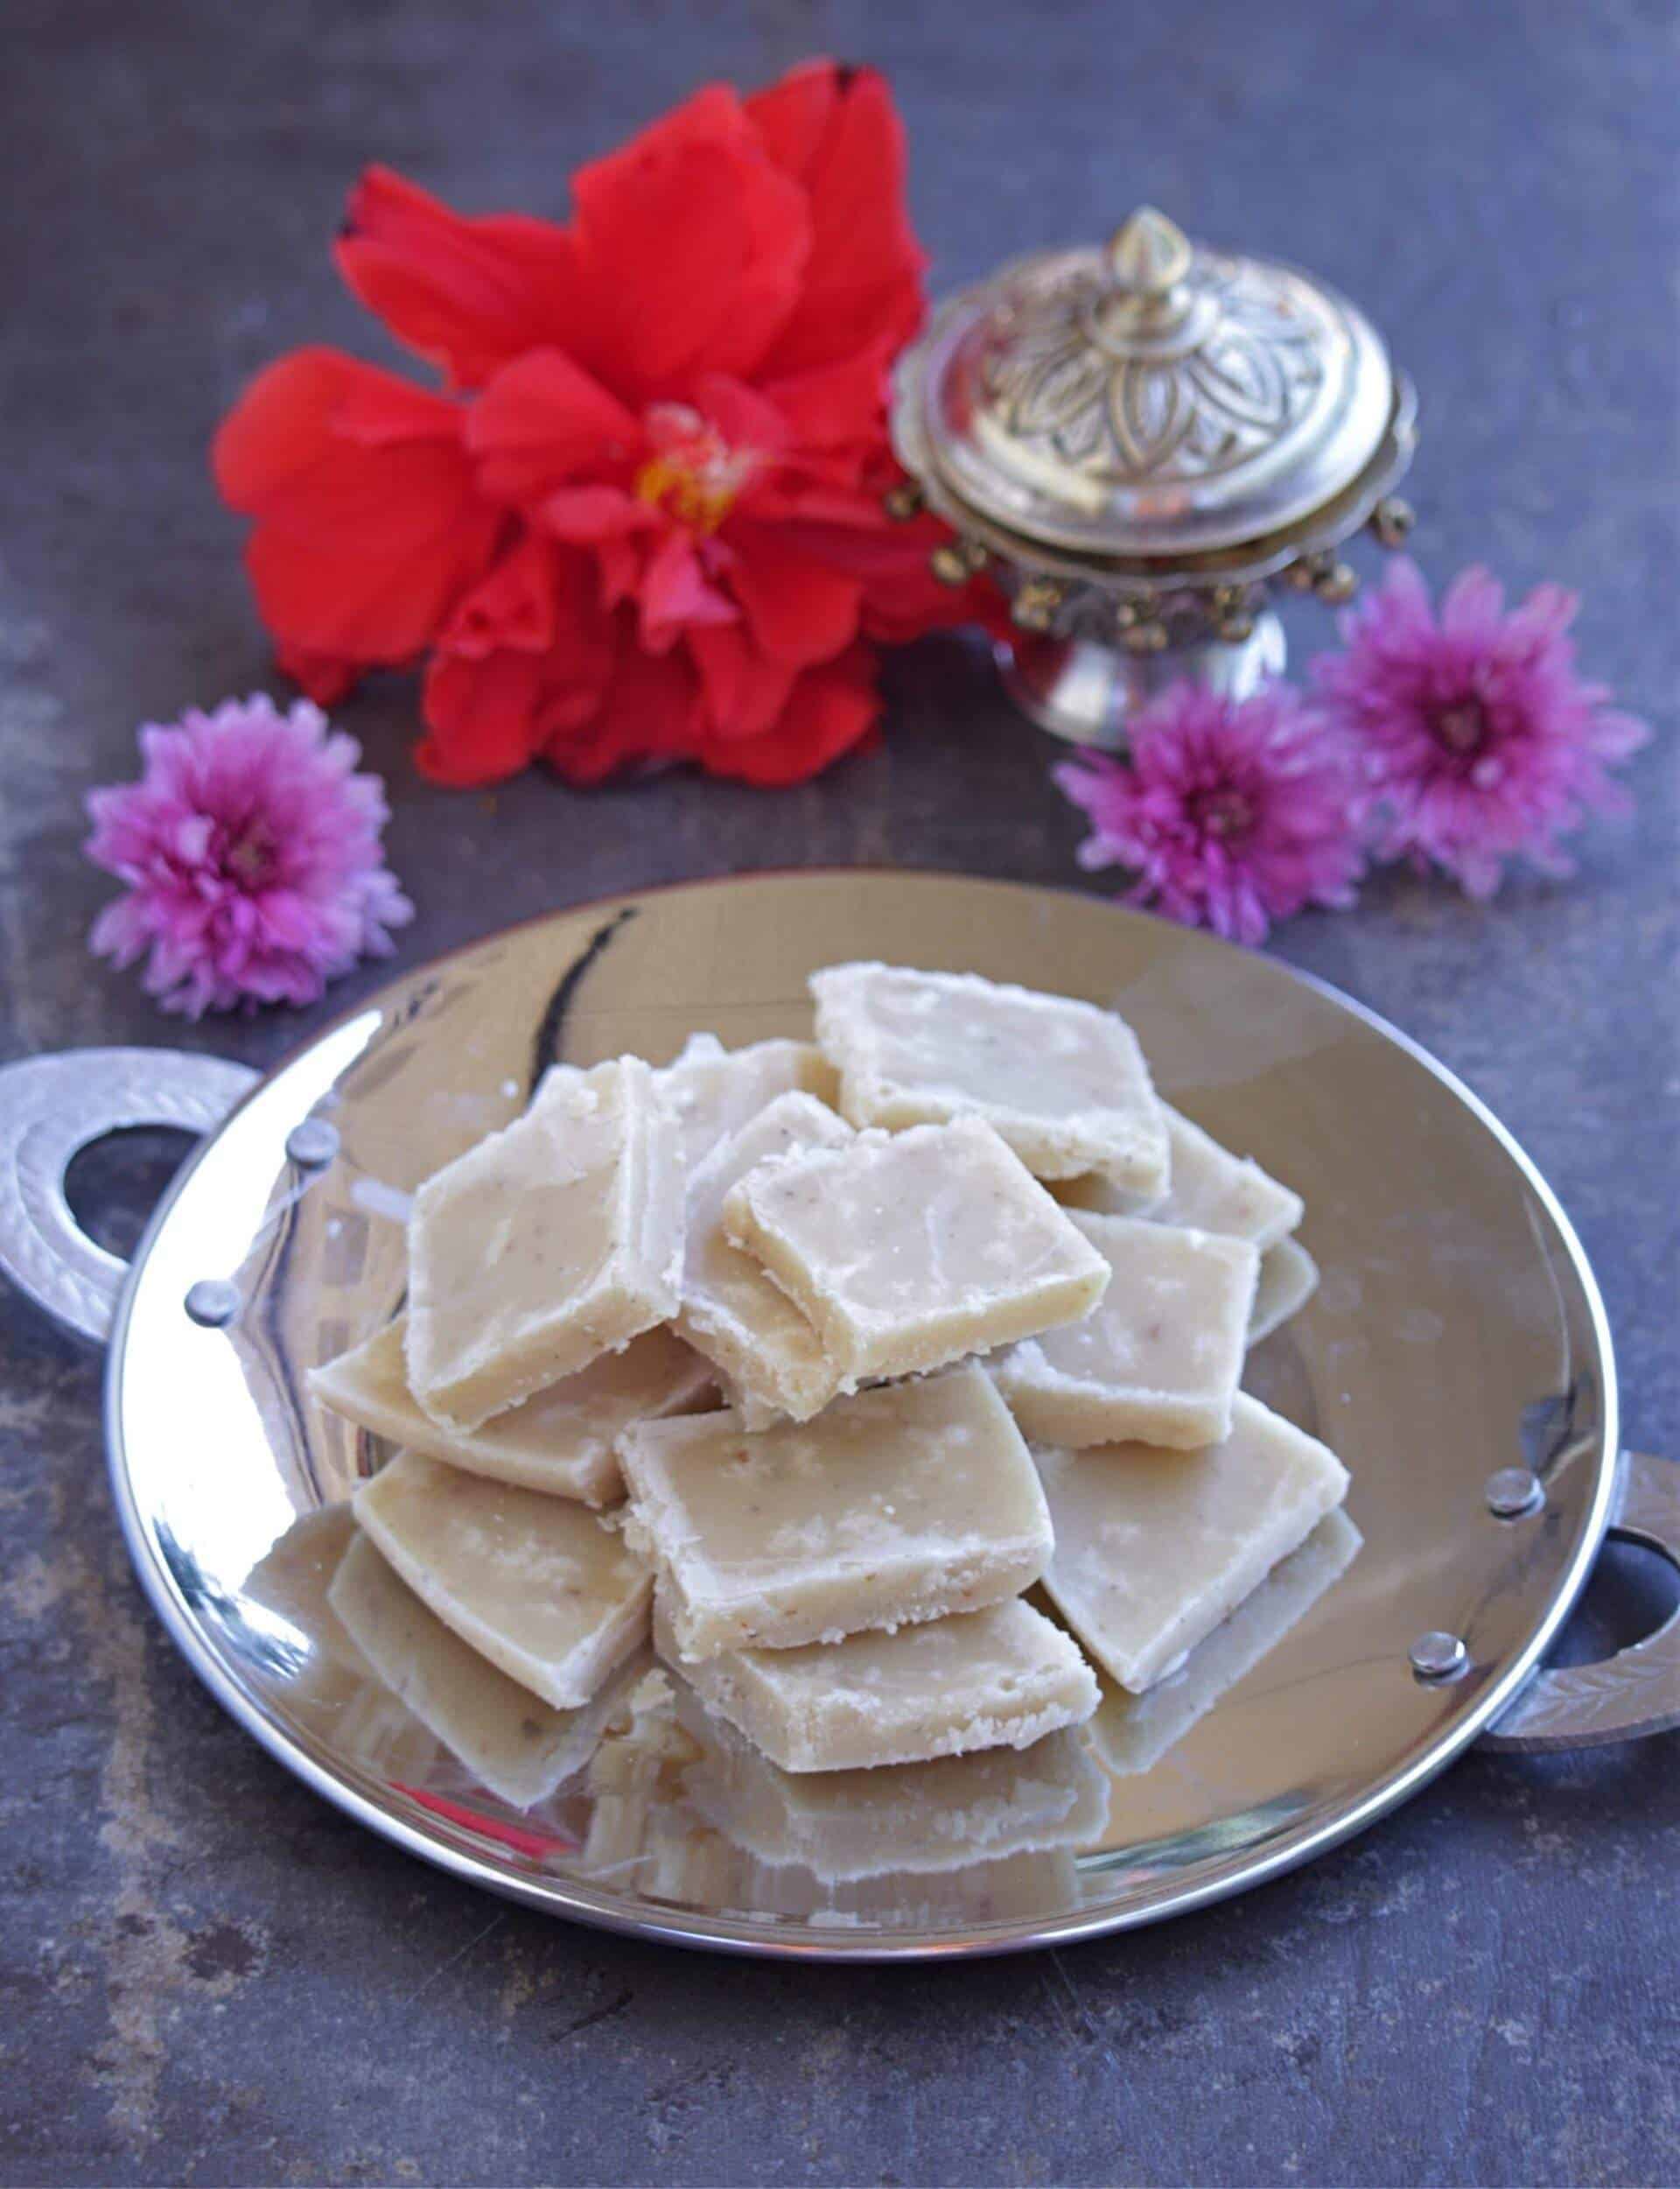 Maida Burfi for Diwali with flowers in the background